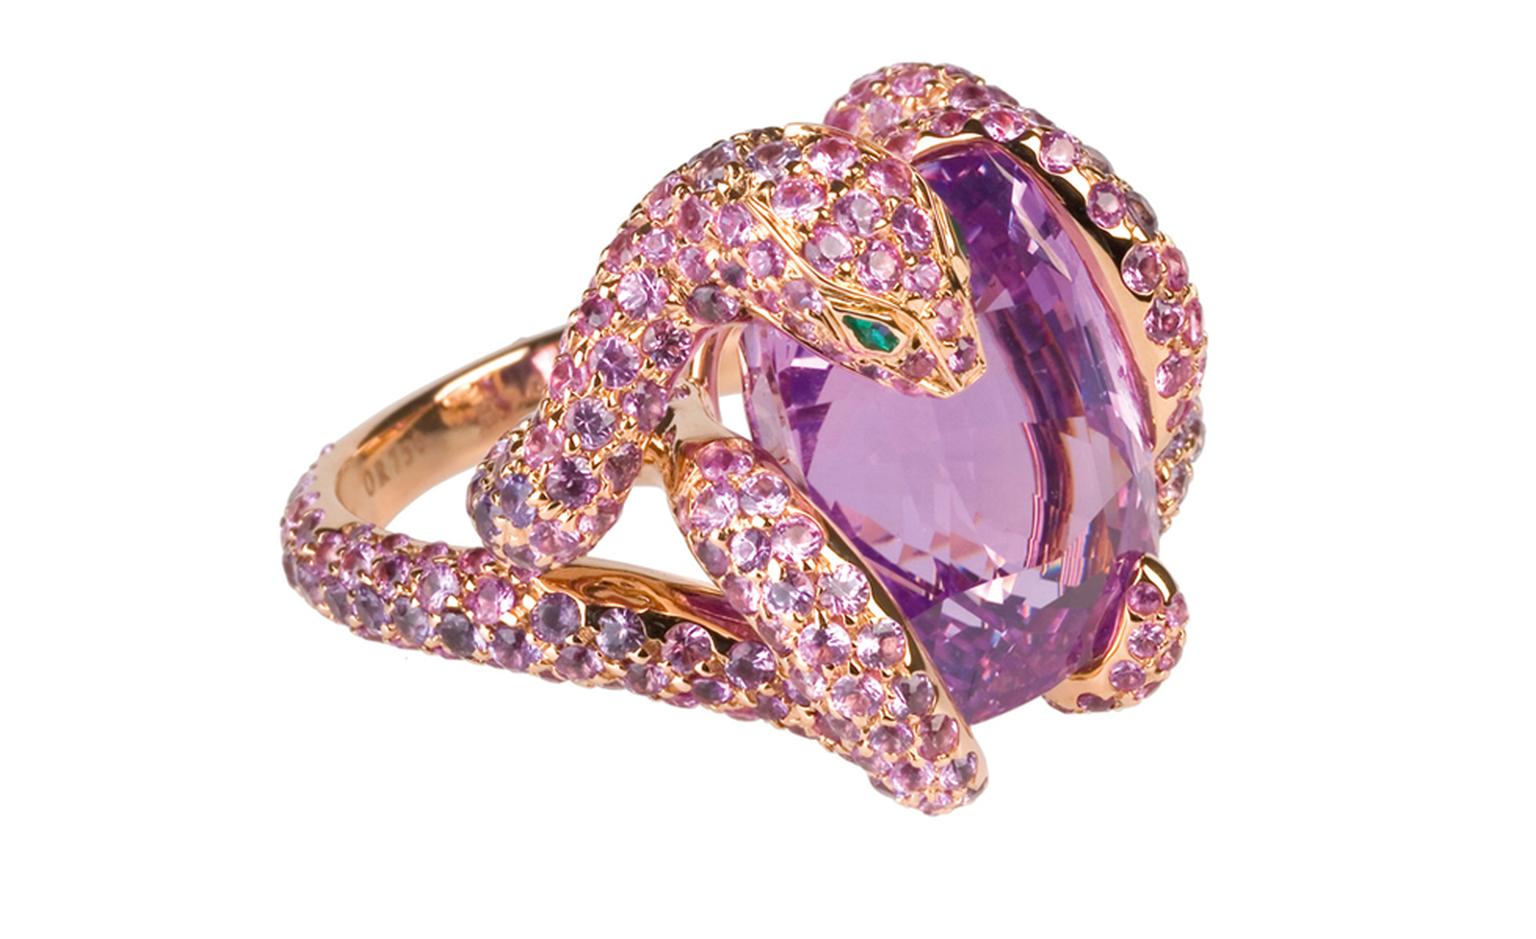 Boucheron Python ring with a Ceylon pink 17.36 carats cushion cut sapphire and 330 pink and 51 purple sapphires set into rose gold. Price: £244,000